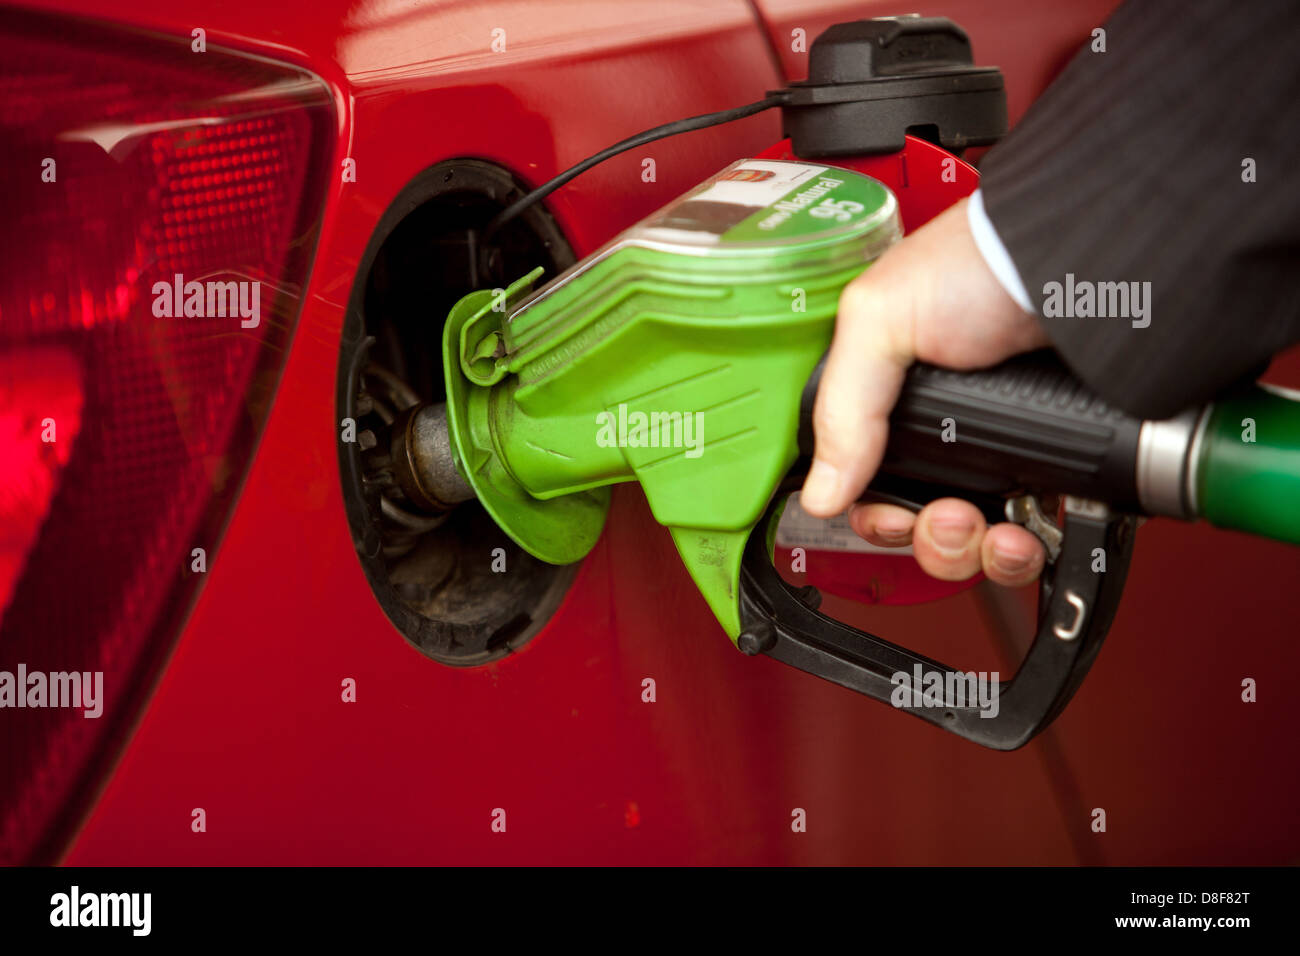 Man Hand pumping gasoline nozzle and fills gasoline into a car increase price growth Stock Photo